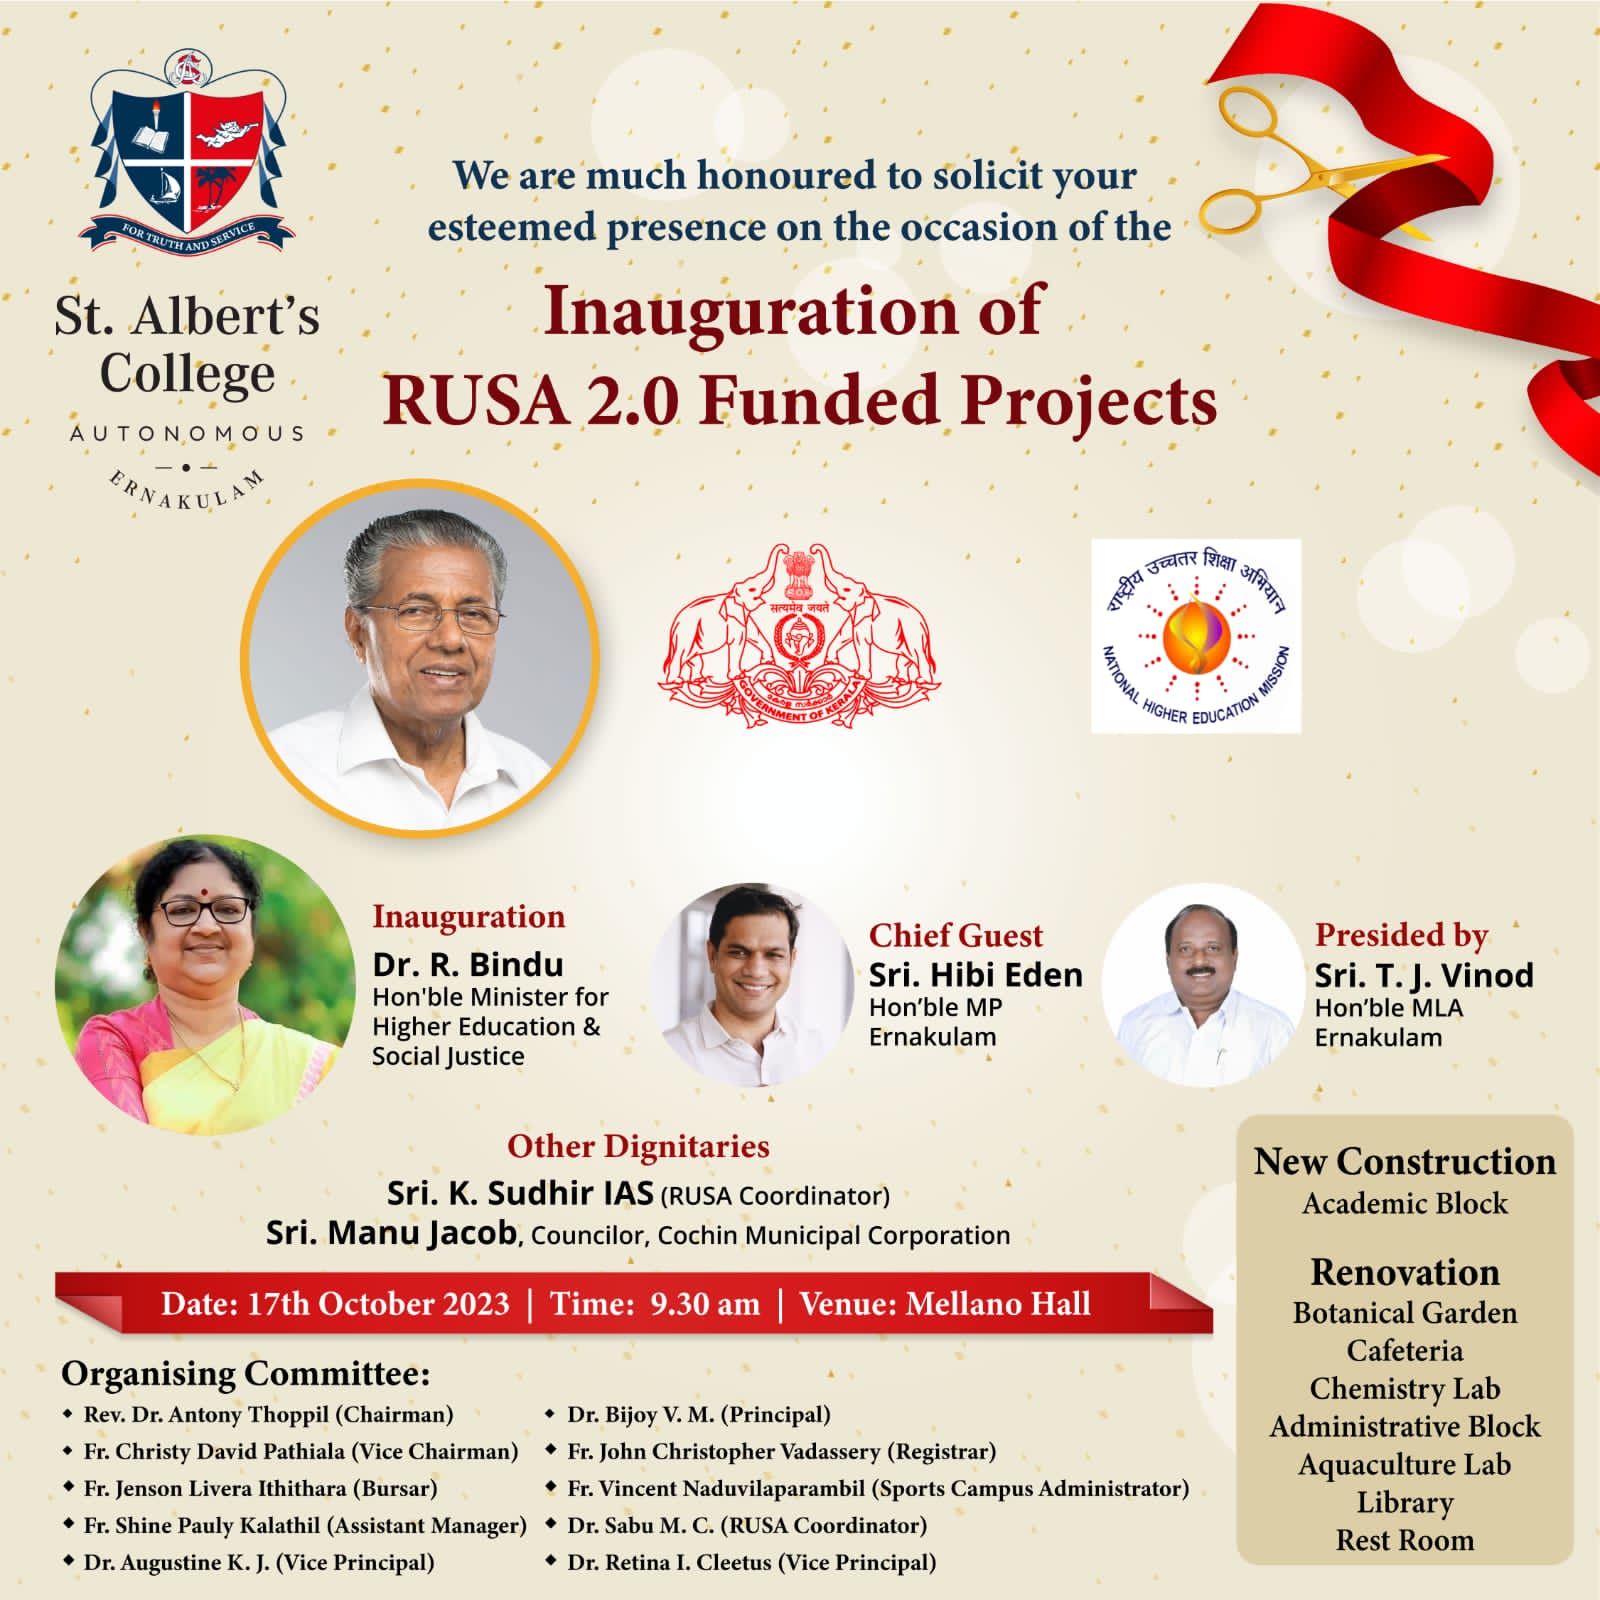 Inauguration of RUSA 2.0 Funded Projects